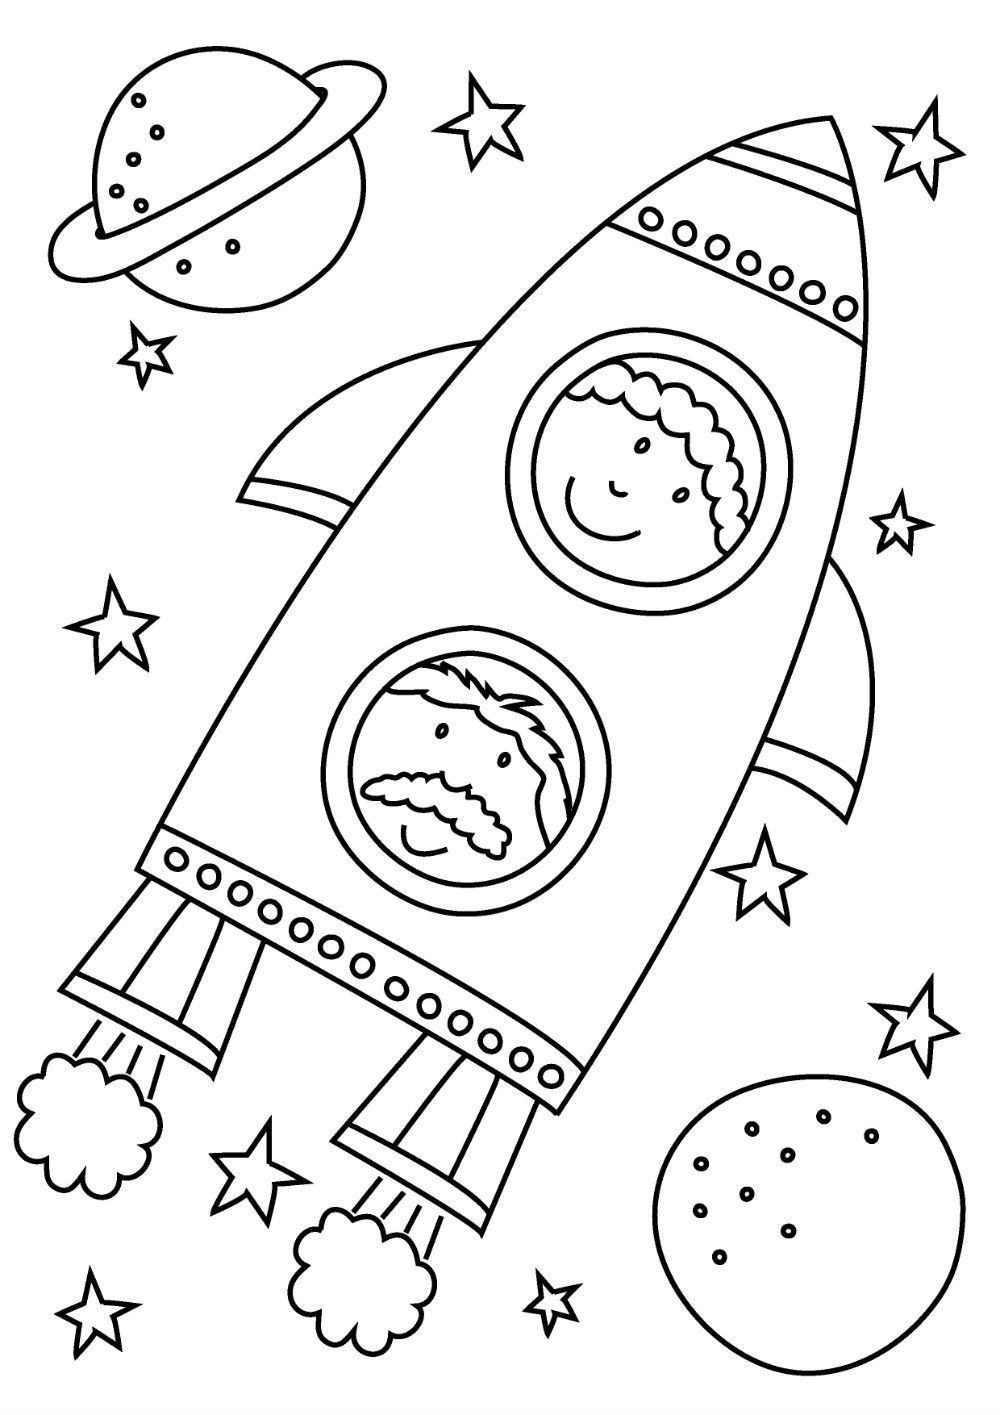 Stencils for coloring for children - template